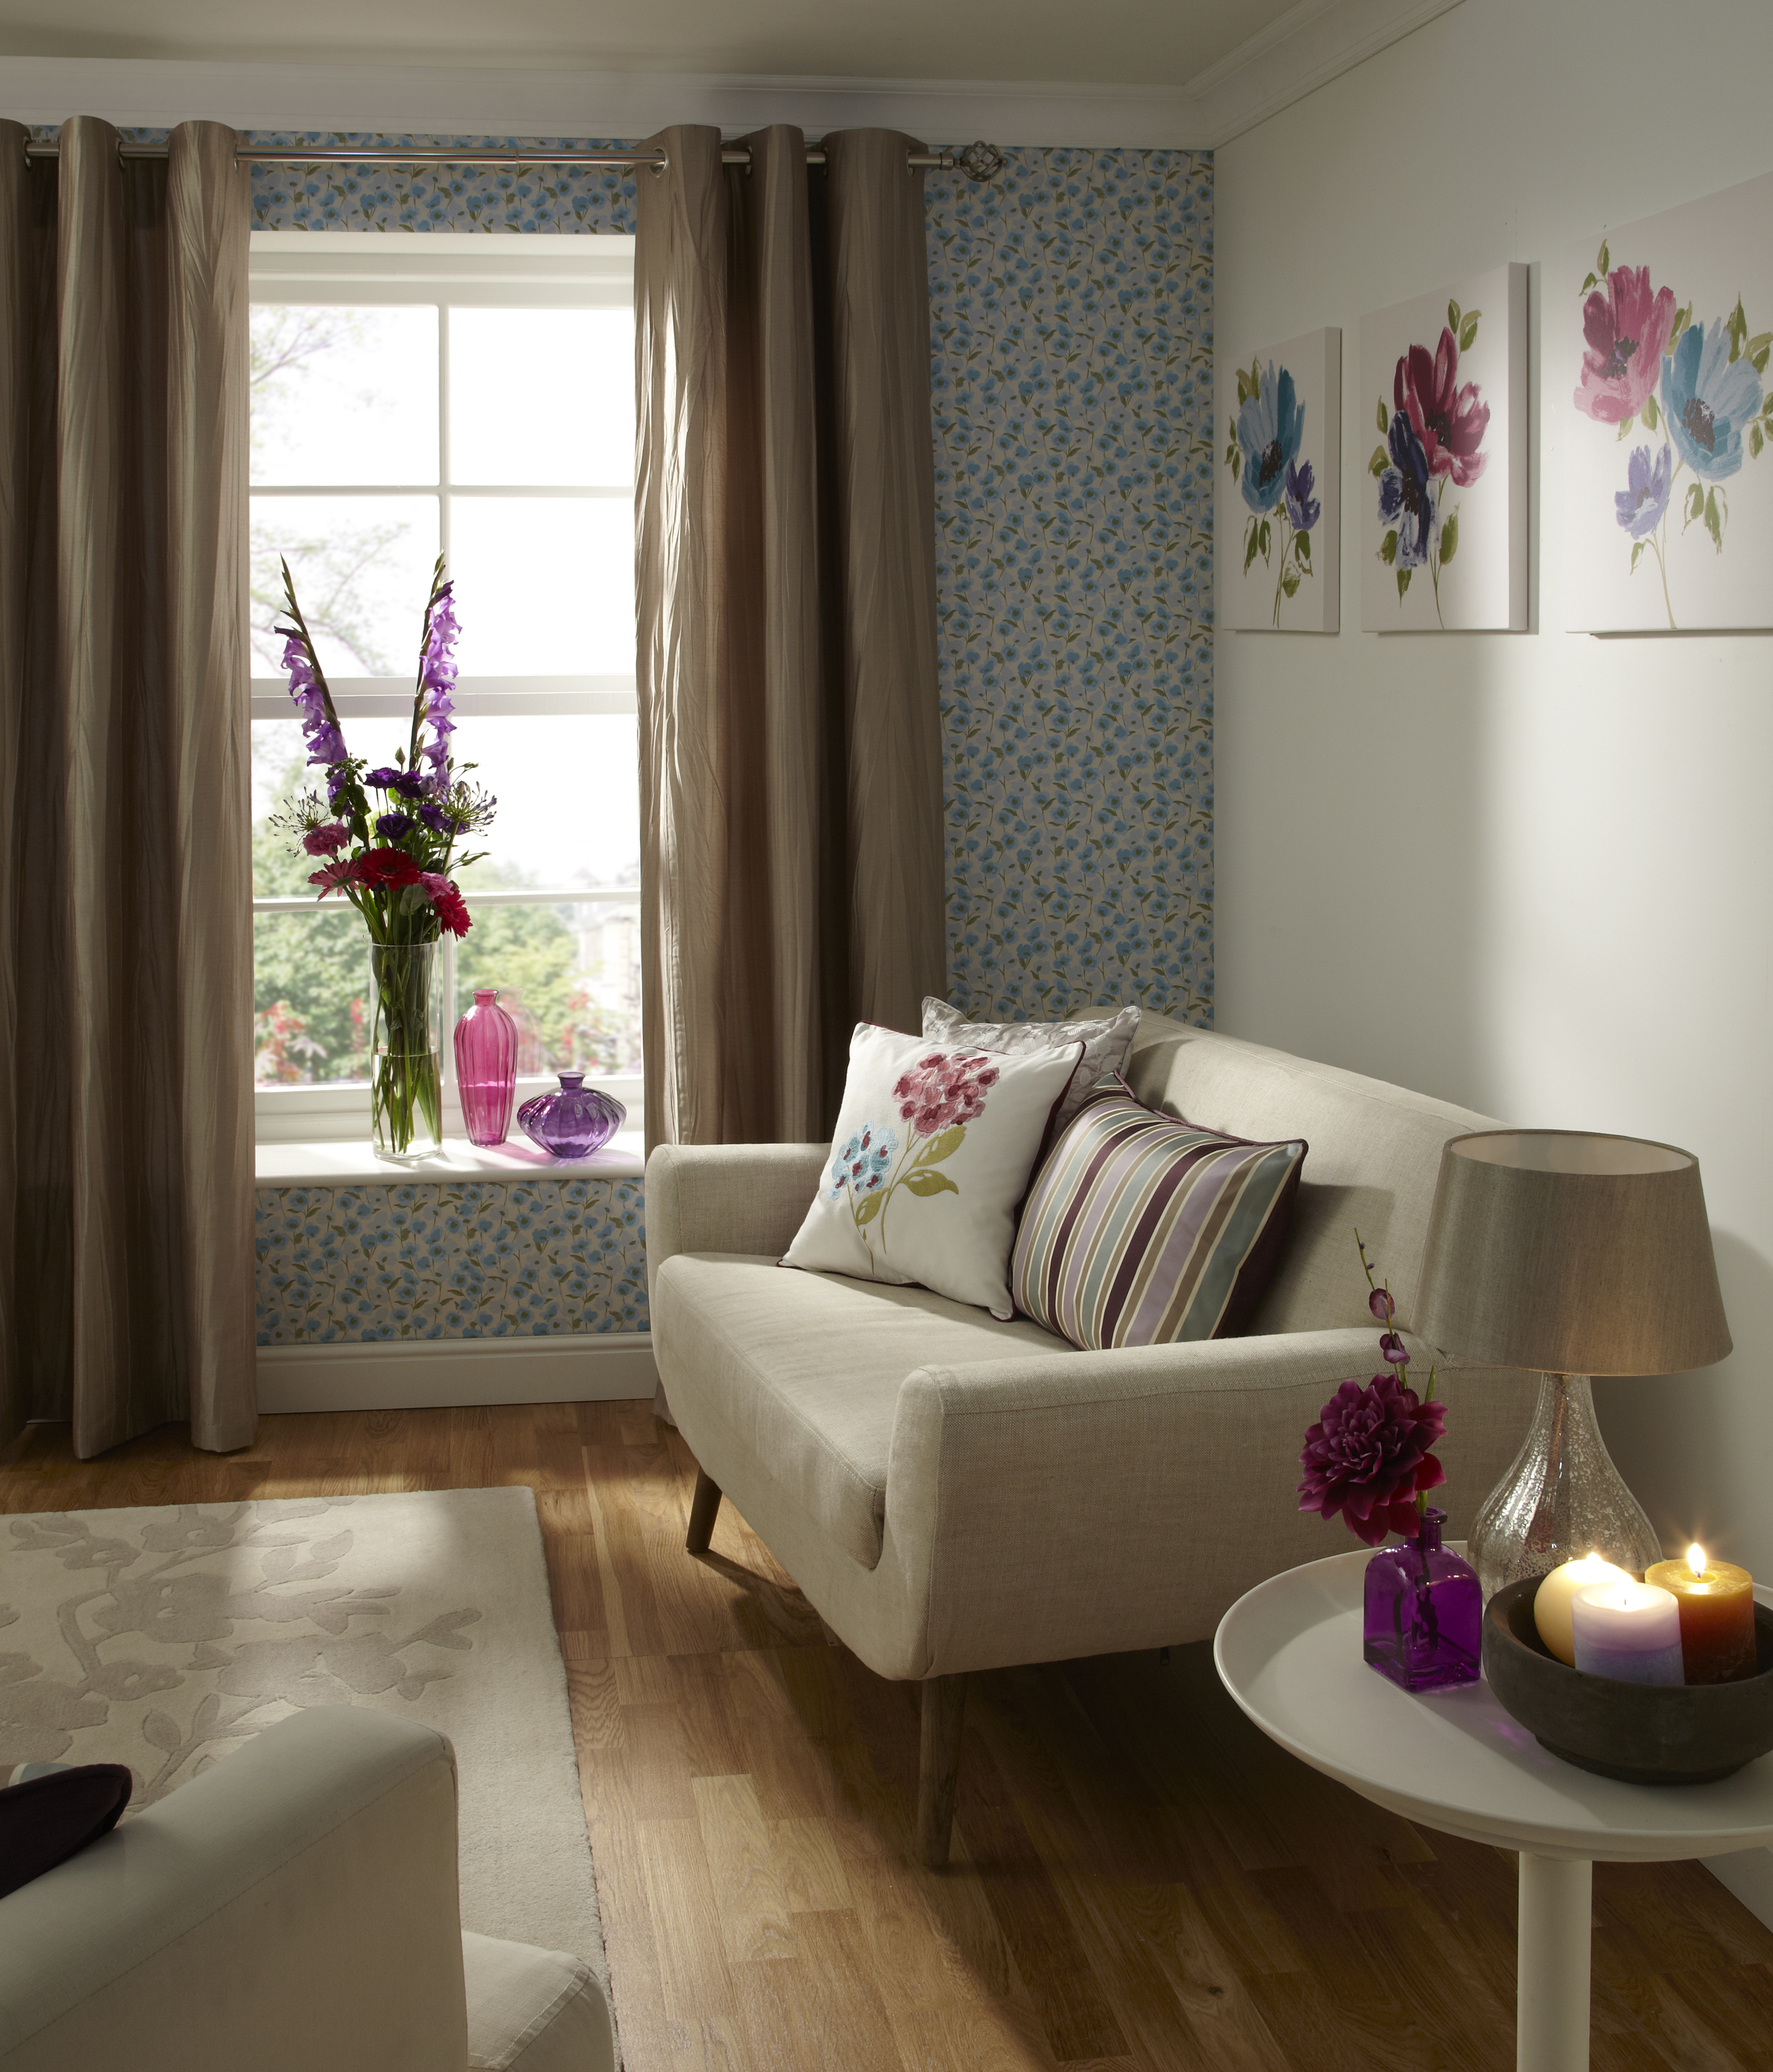 In Bloom Summer Brights Beautiful Interiors At The Click Of A Button